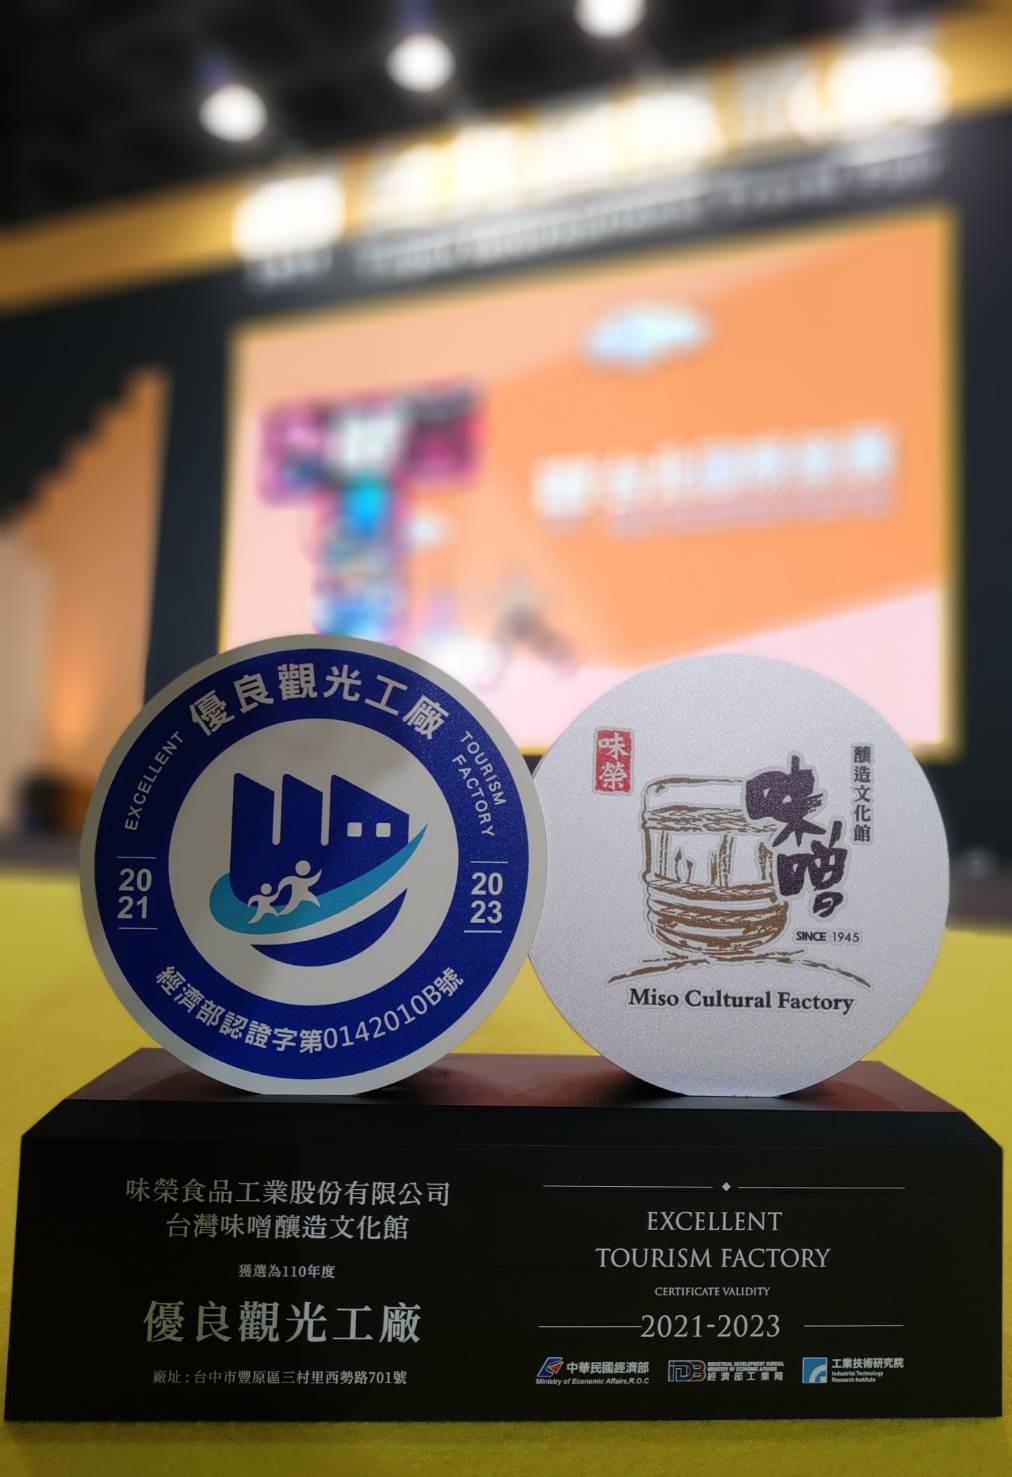 Won the honor of "Excellent Tourism Factory" selected by the Ministry of Economic Affairs